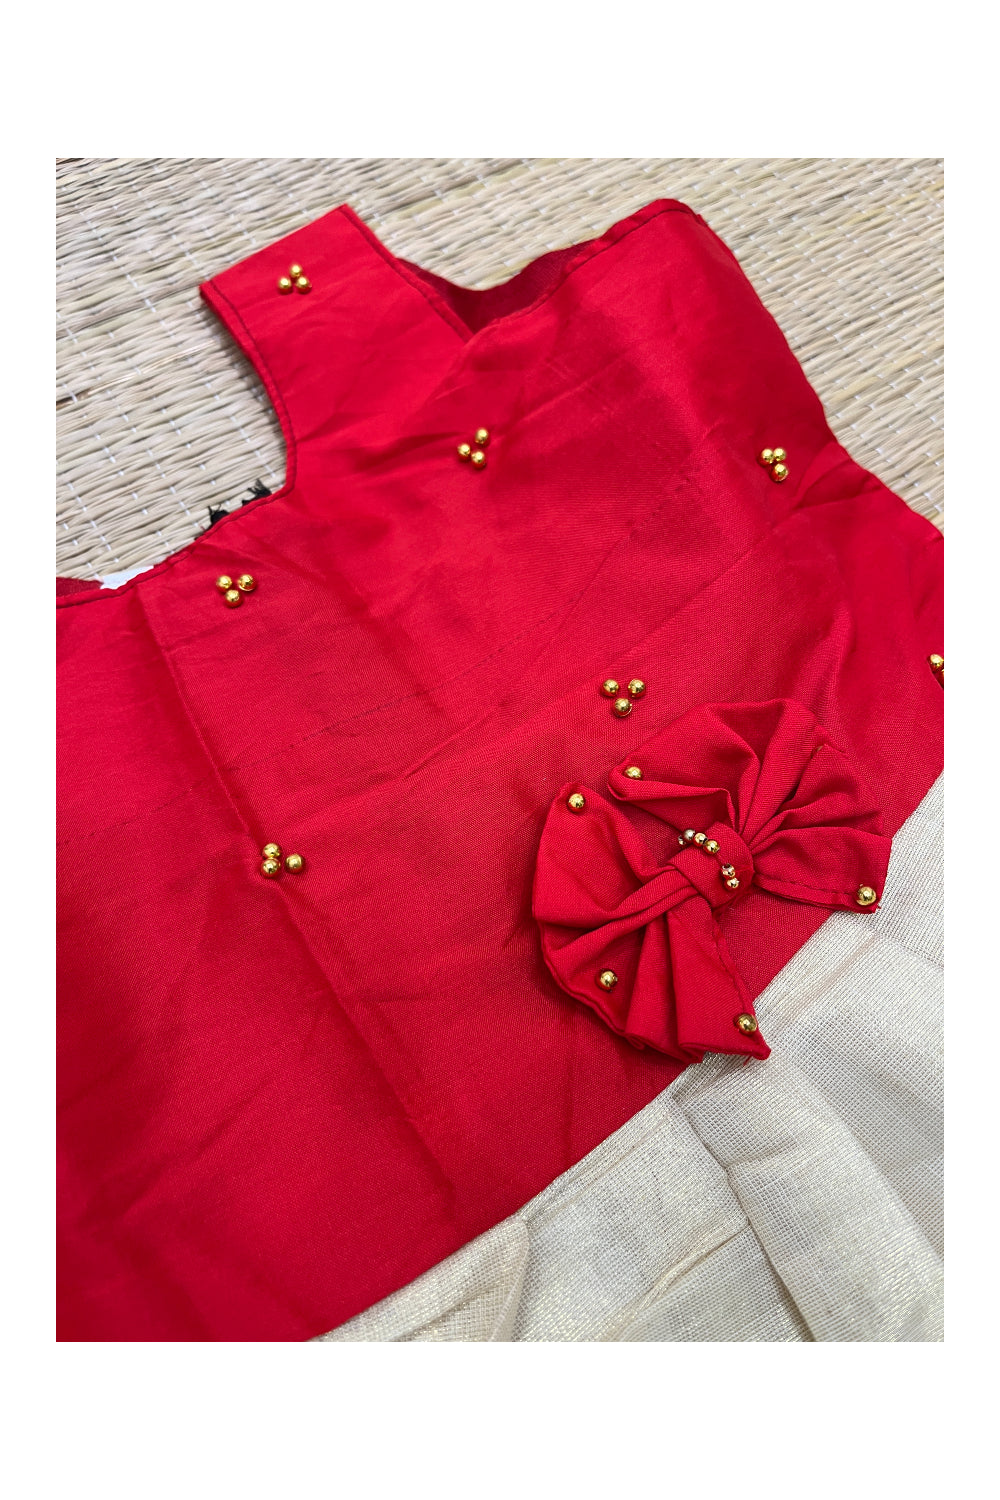 Southloom Kerala Tissue Frock with Red Bead Work Designs for Kids (4 Years)